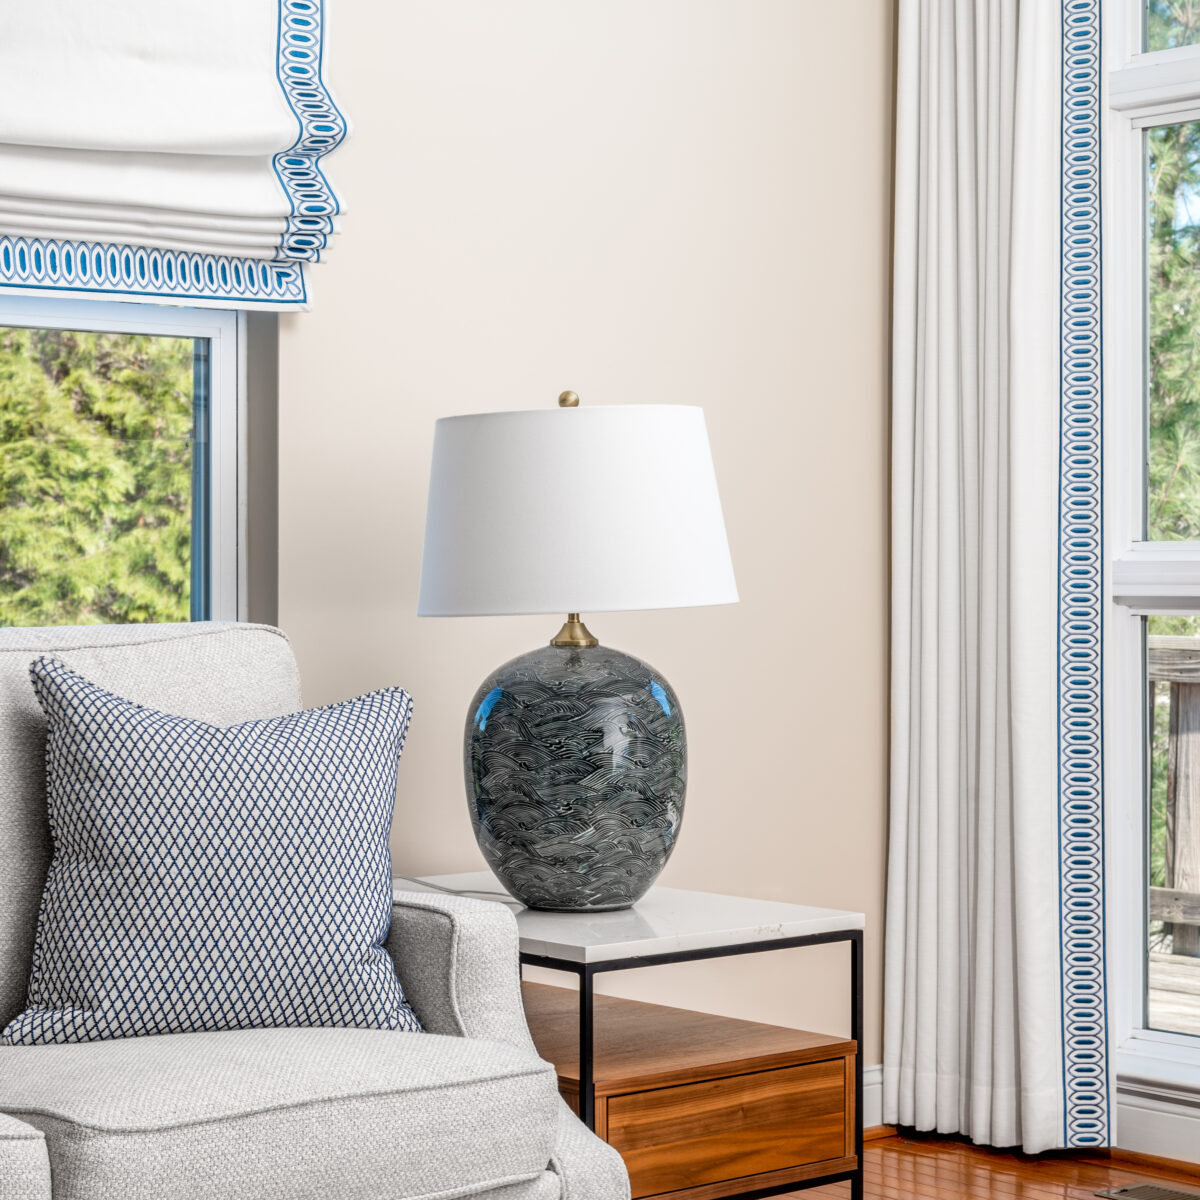 table lamp and custom upholstery, custom window treatments for an interior design in Maryland